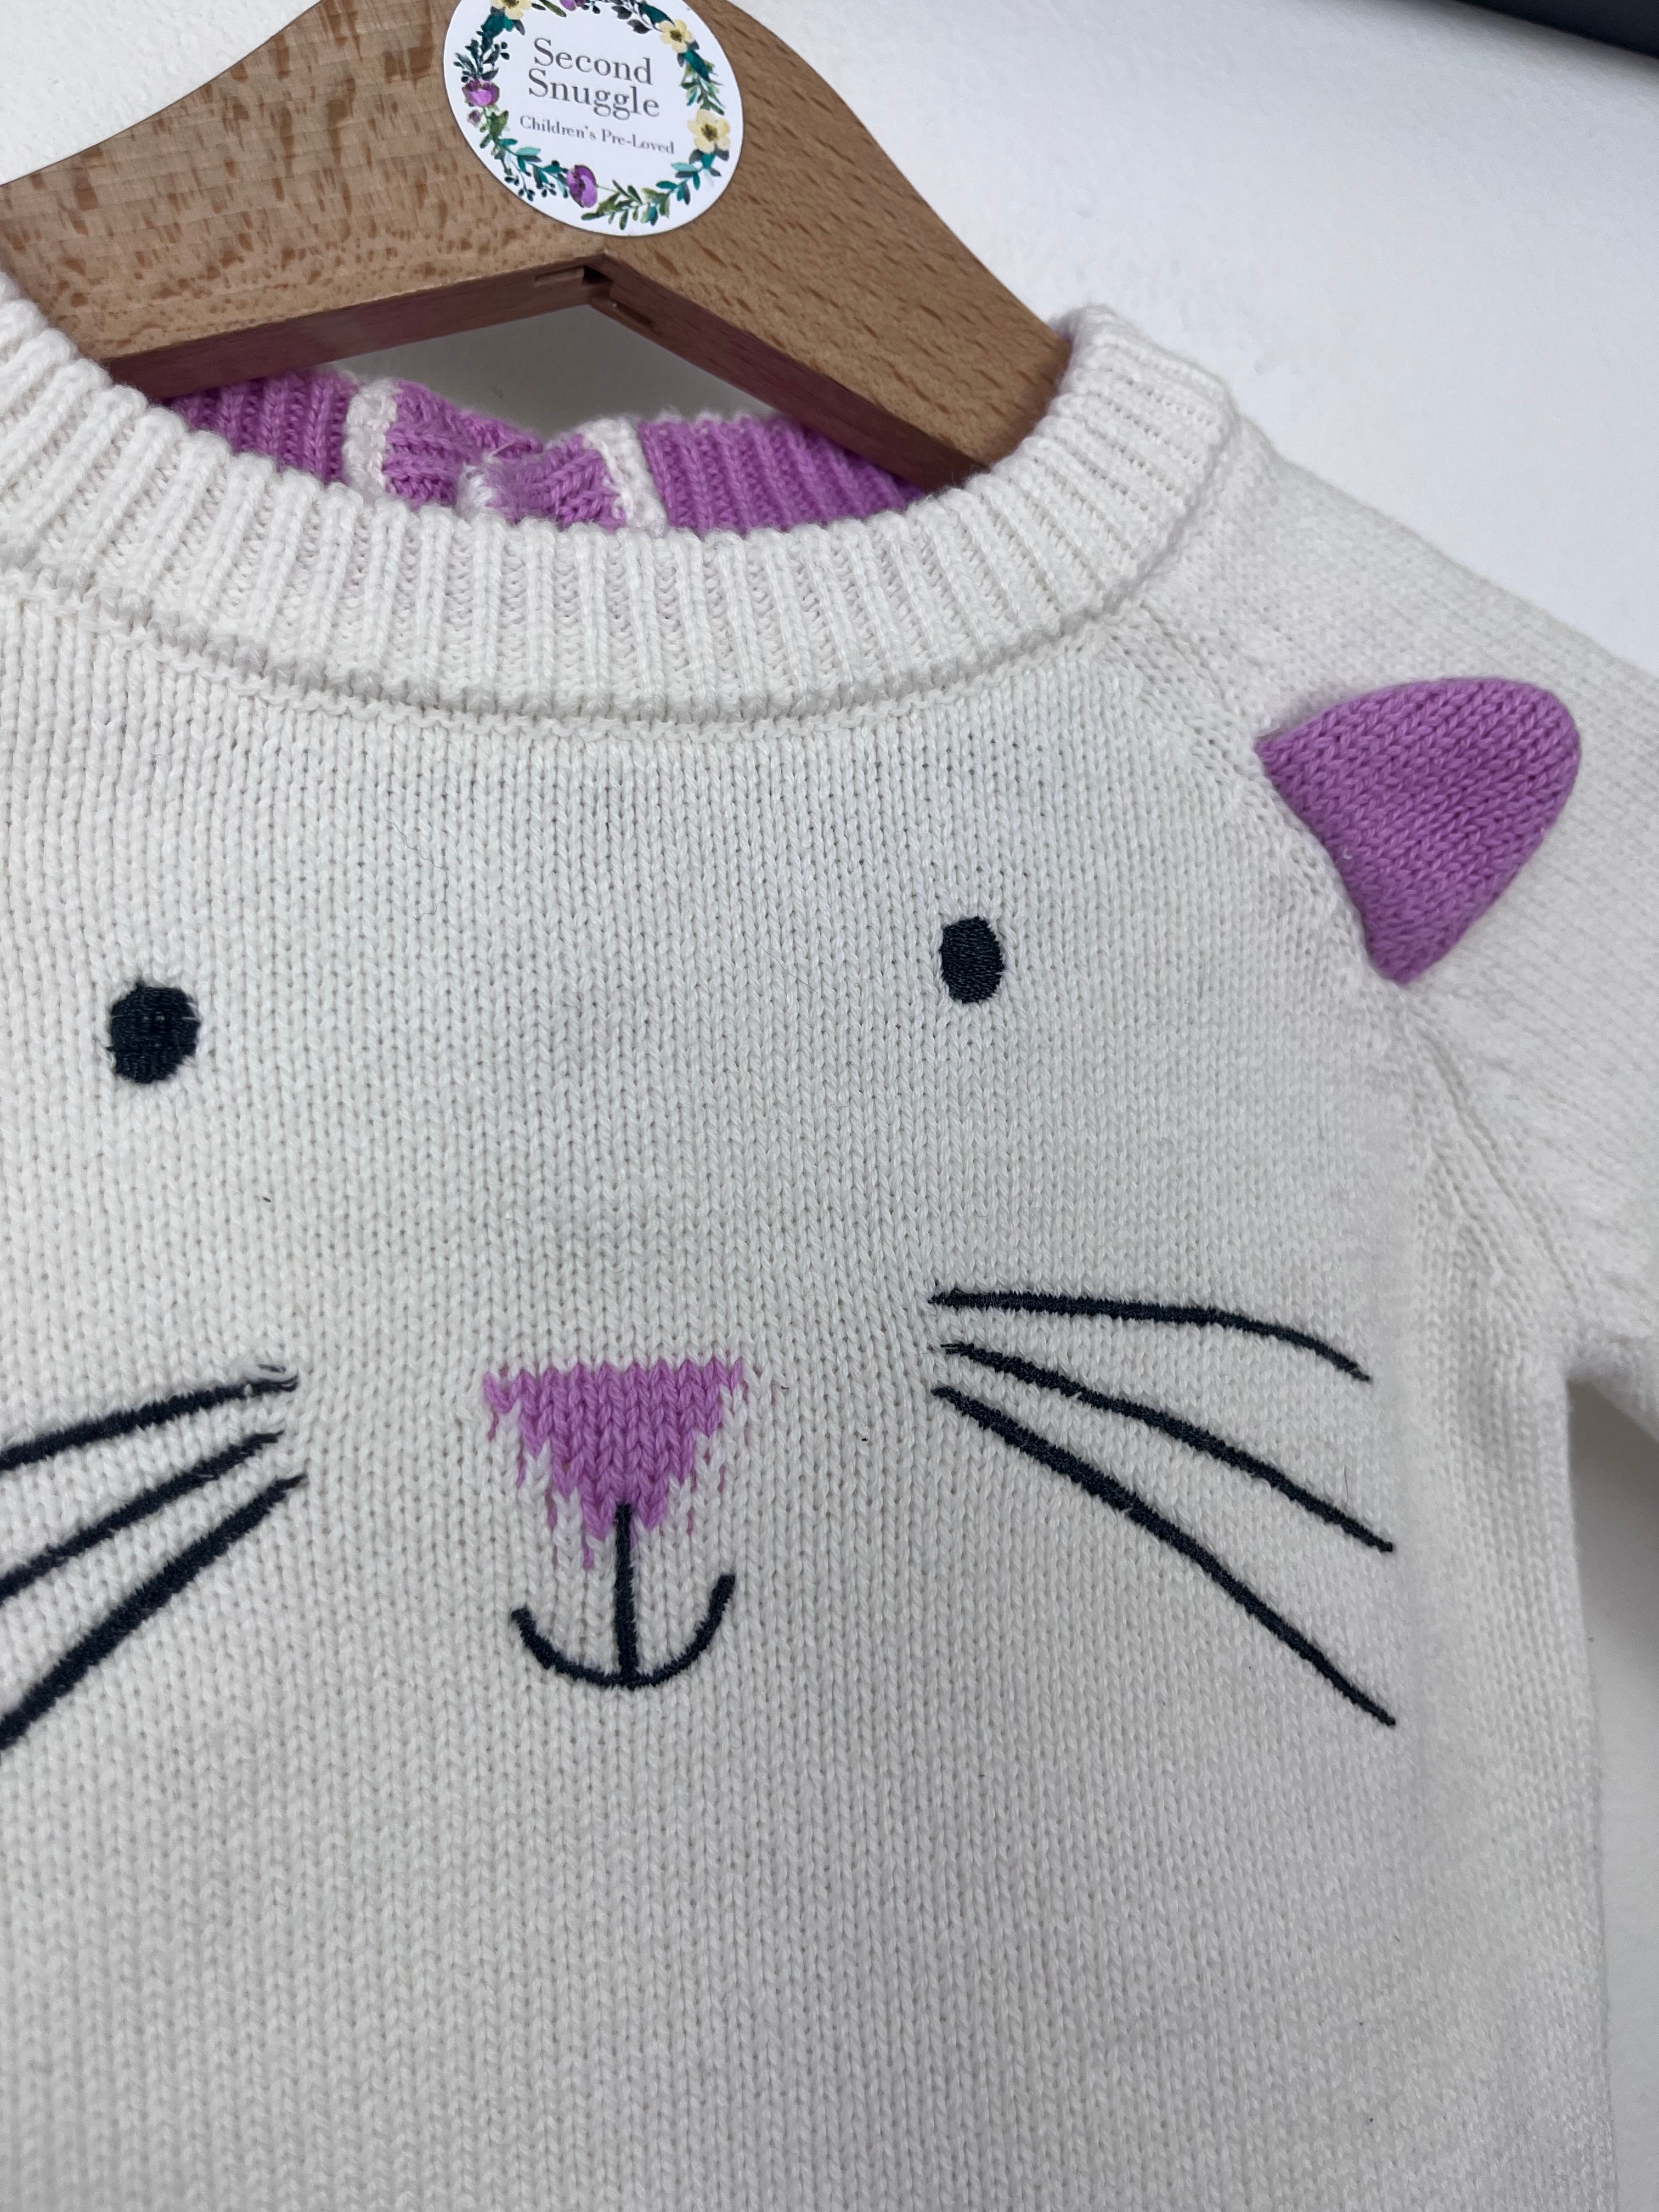 Joules 0-3 Months-Jumpers-Second Snuggle Preloved